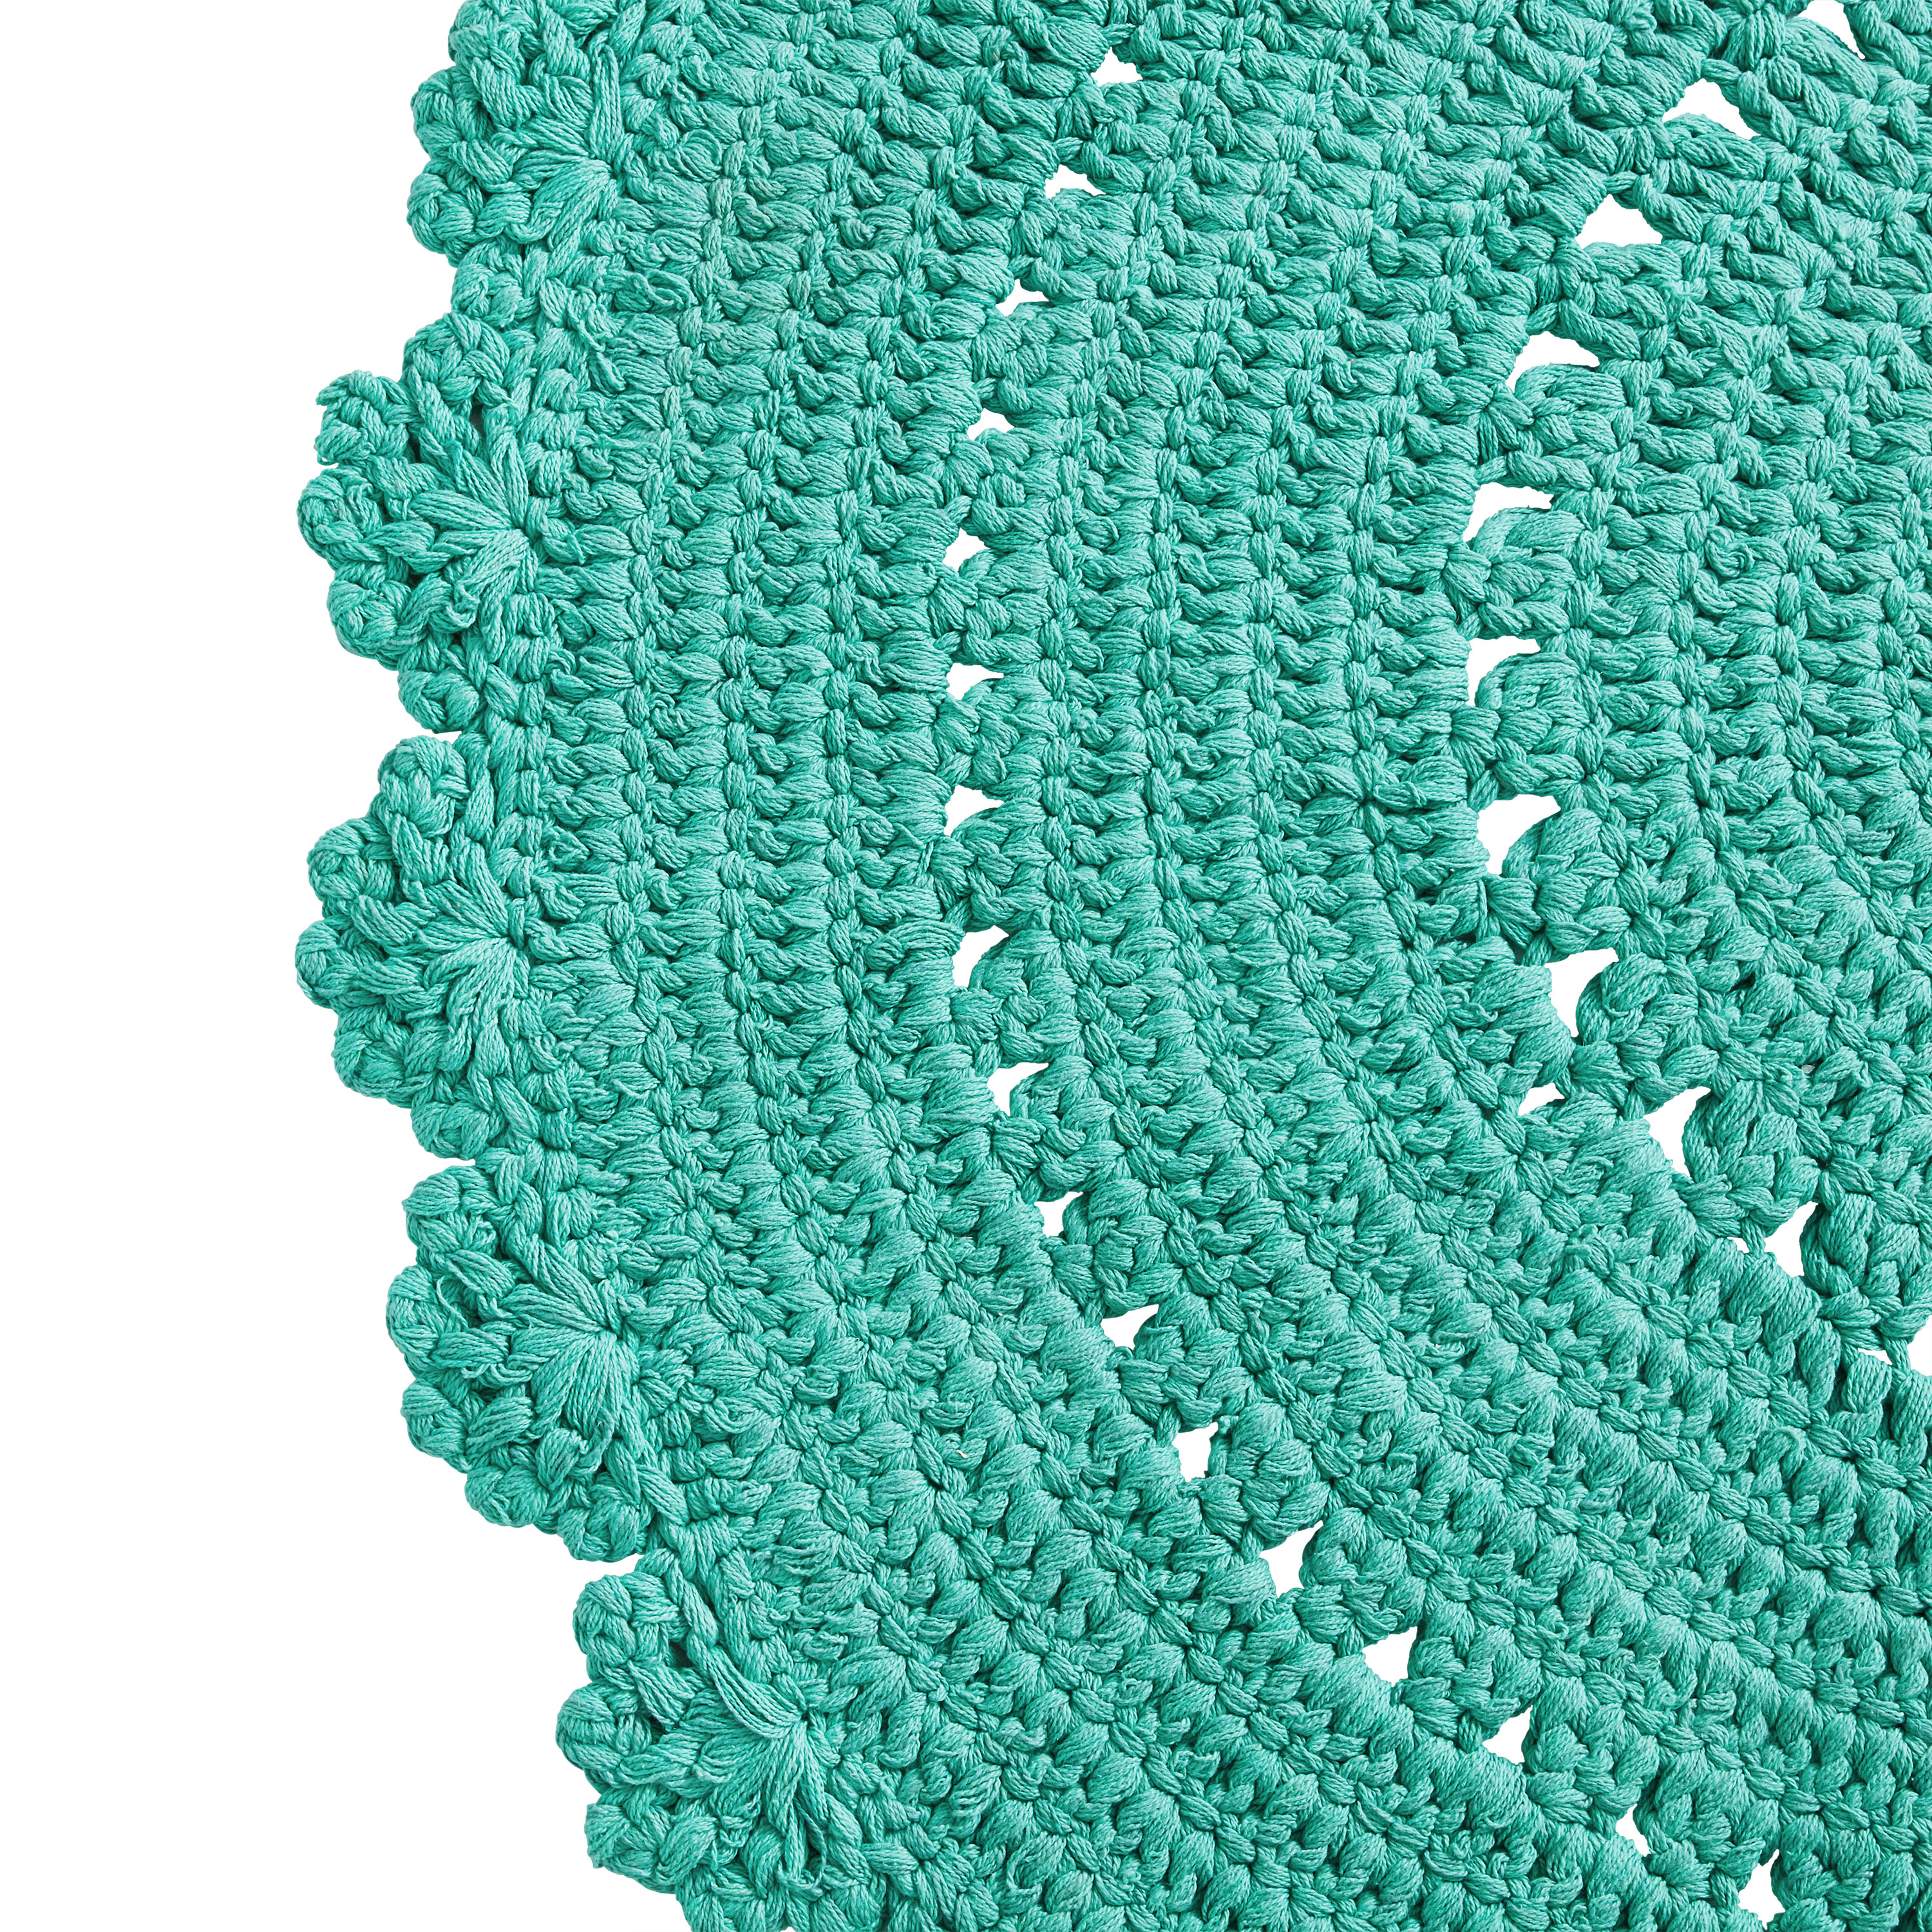 The Pioneer Woman Round Cotton Crochet Accent Rug, Teal - image 5 of 5